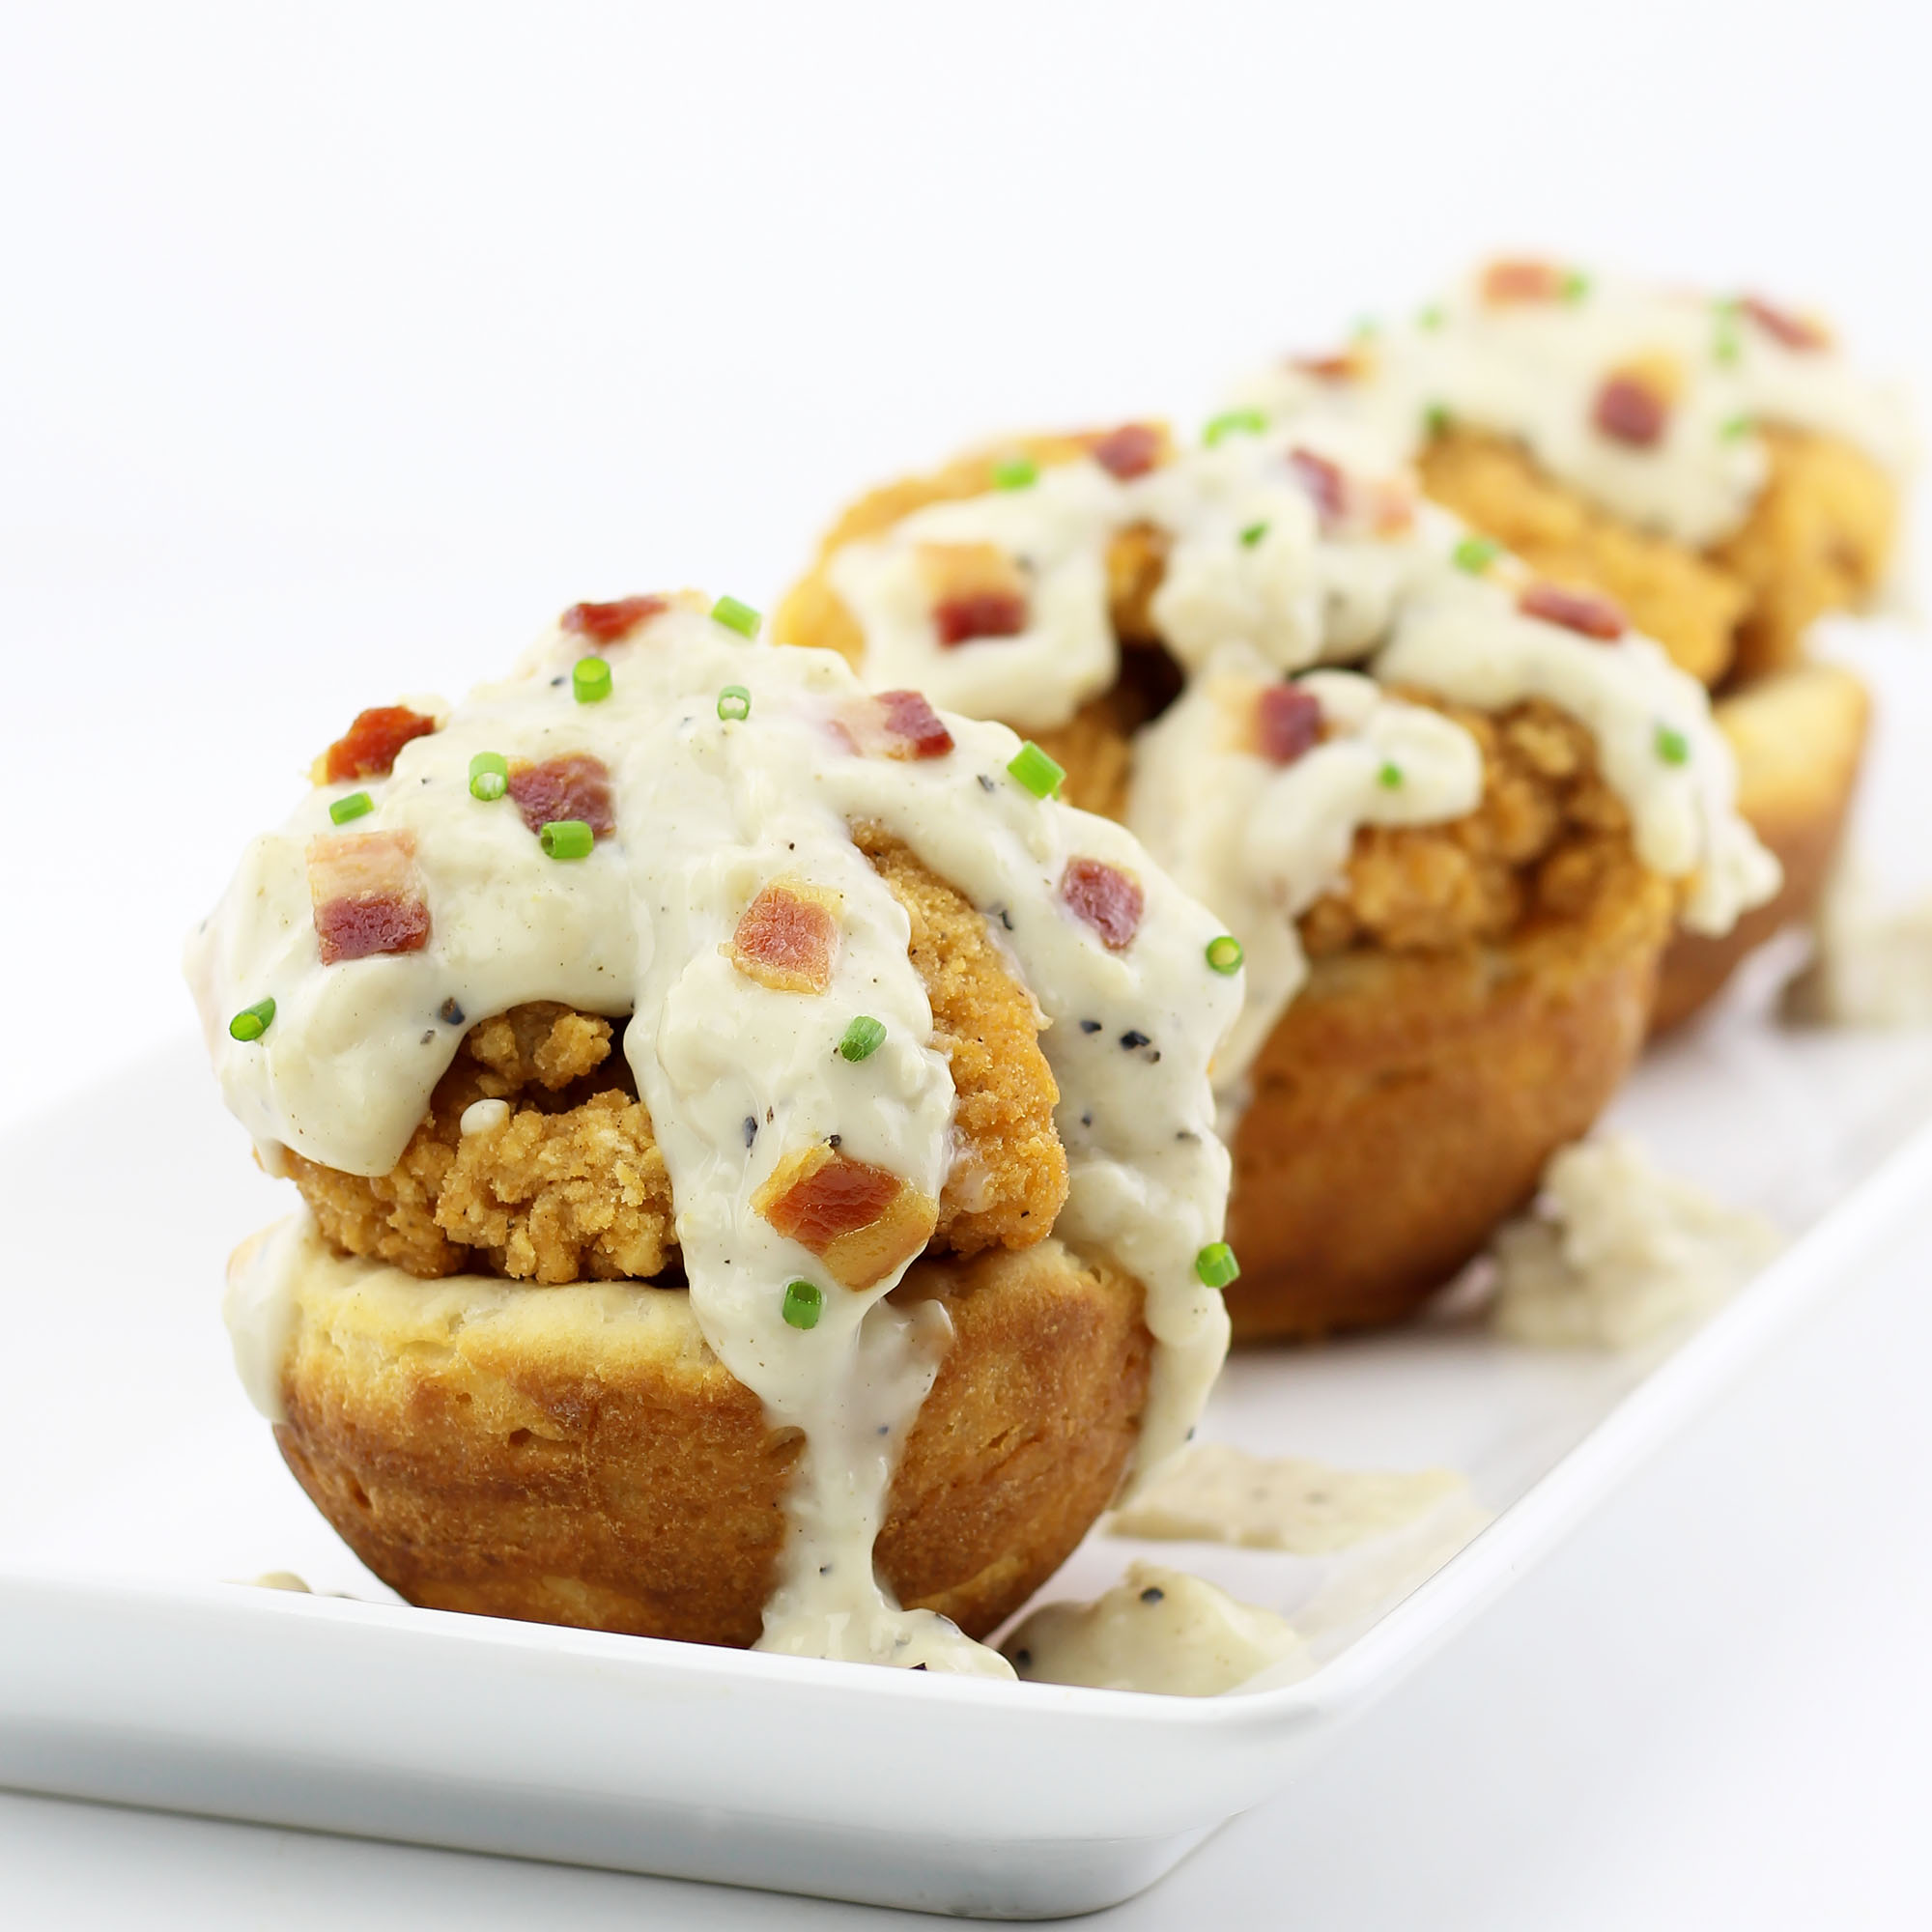 Popcorn Chicken and Bacon Country Gravy in Edible Biscuit Bowls